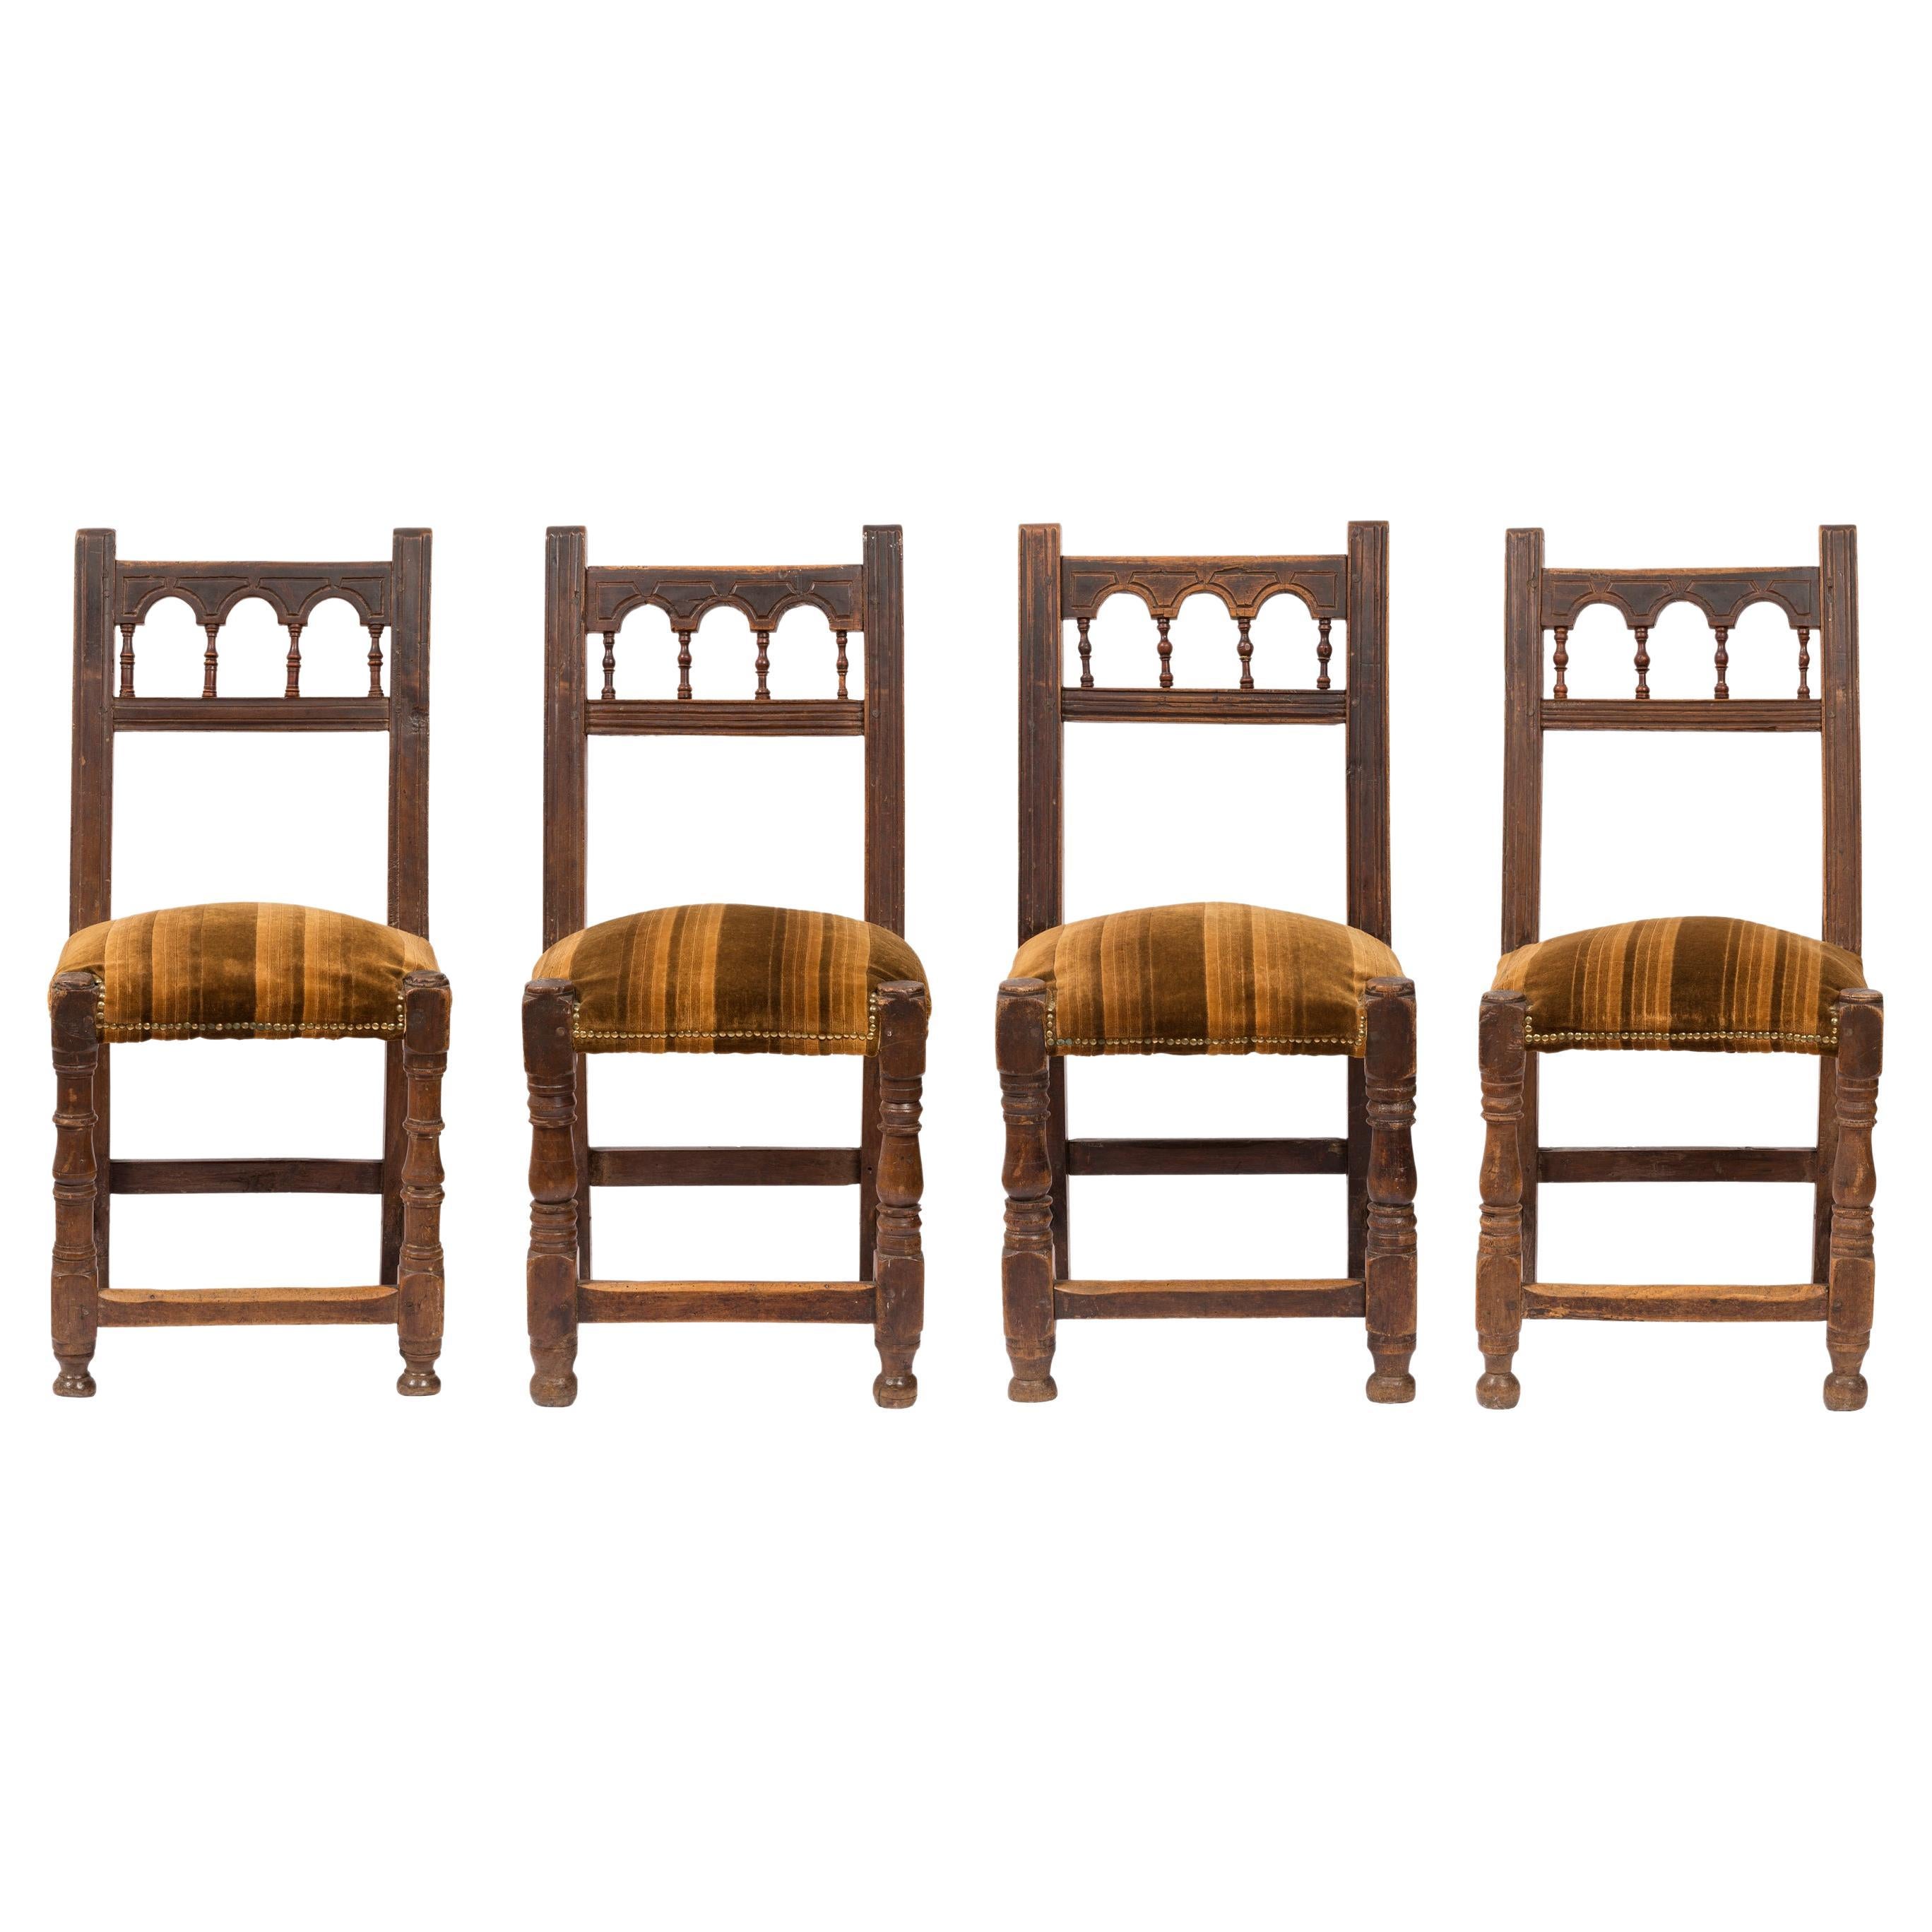 Set of Antique Handmade, Upholstered Rustic Wood Chairs from Northern Spain For Sale